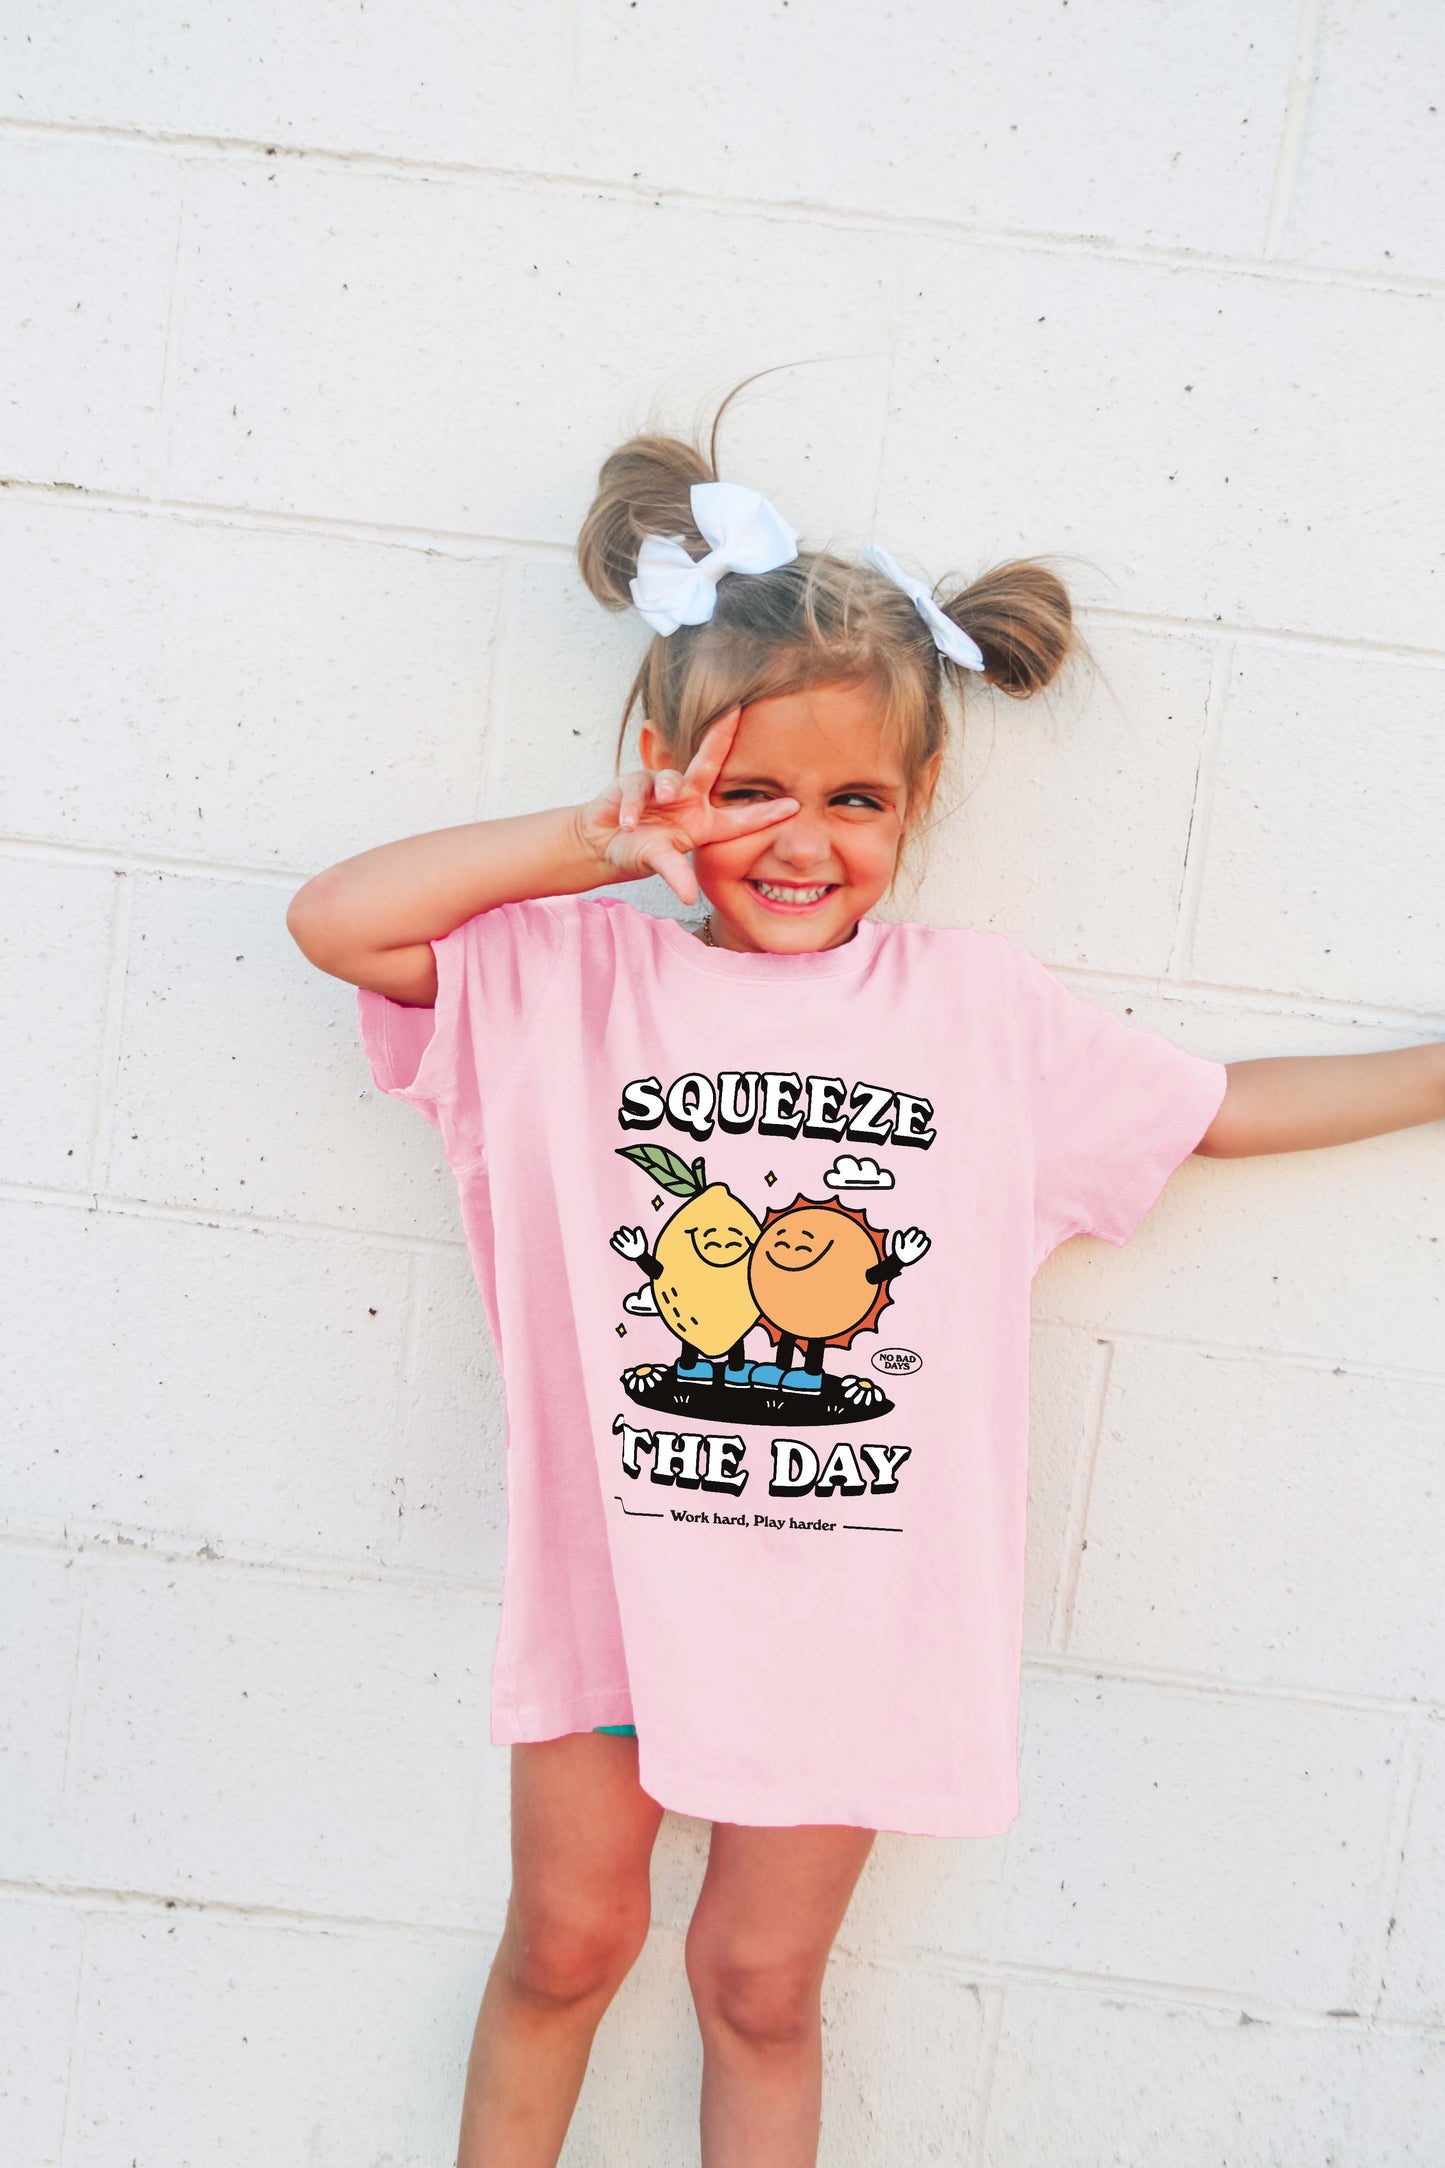 'Squeeze the Day' Kid's T-shirt